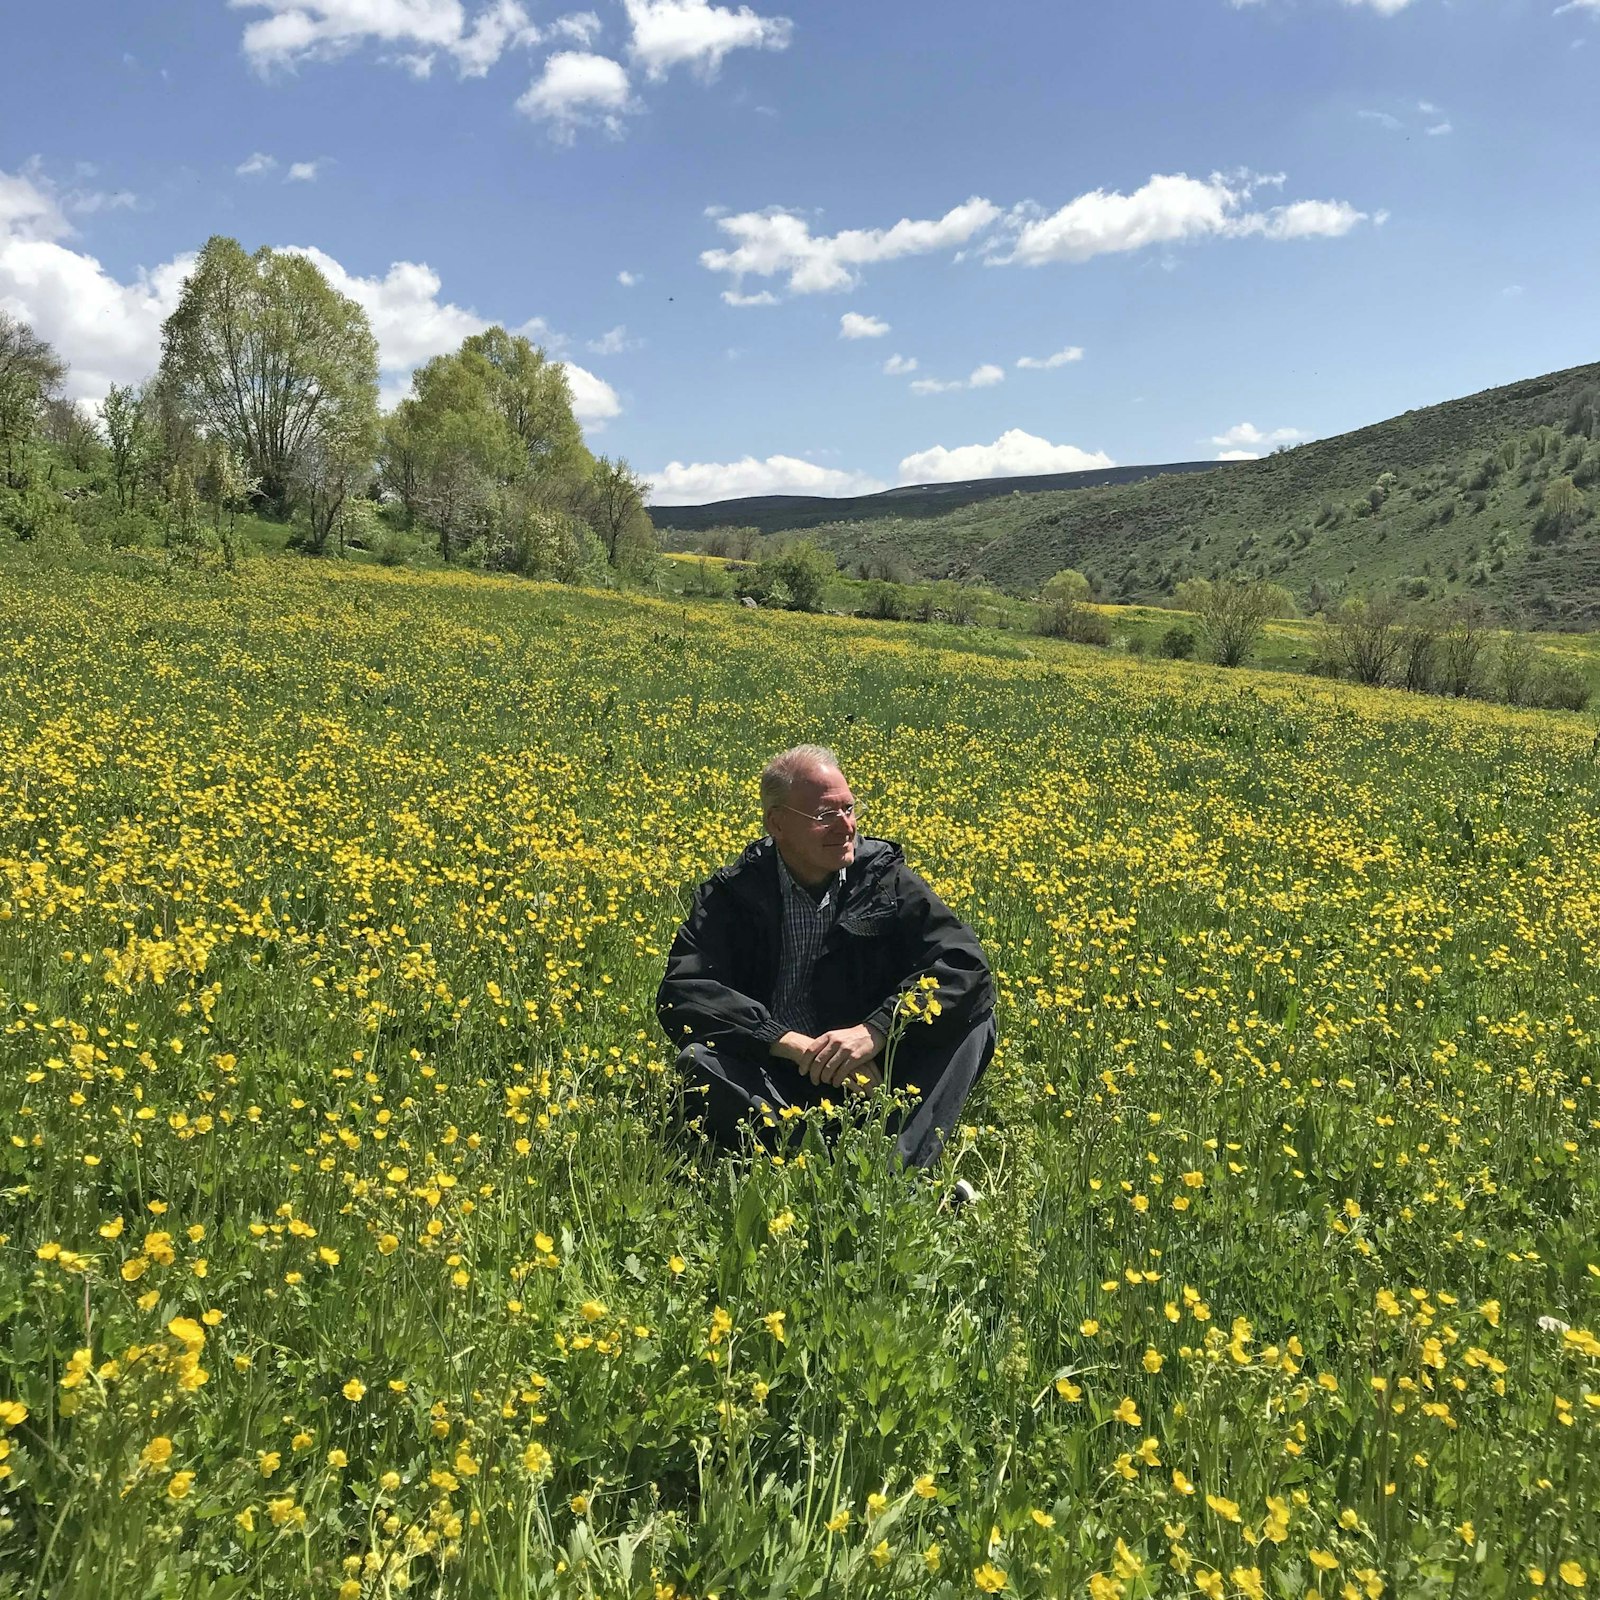 Archbishop Russell pauses in a meadow of wildflowers during a hike in Bingol Province, eastern Turkey. Archbishop Russell served as apostolic nuncio to the eastern European nation for six years, starting in 2016. (Courtesy of Archbishop Paul F. Russell)